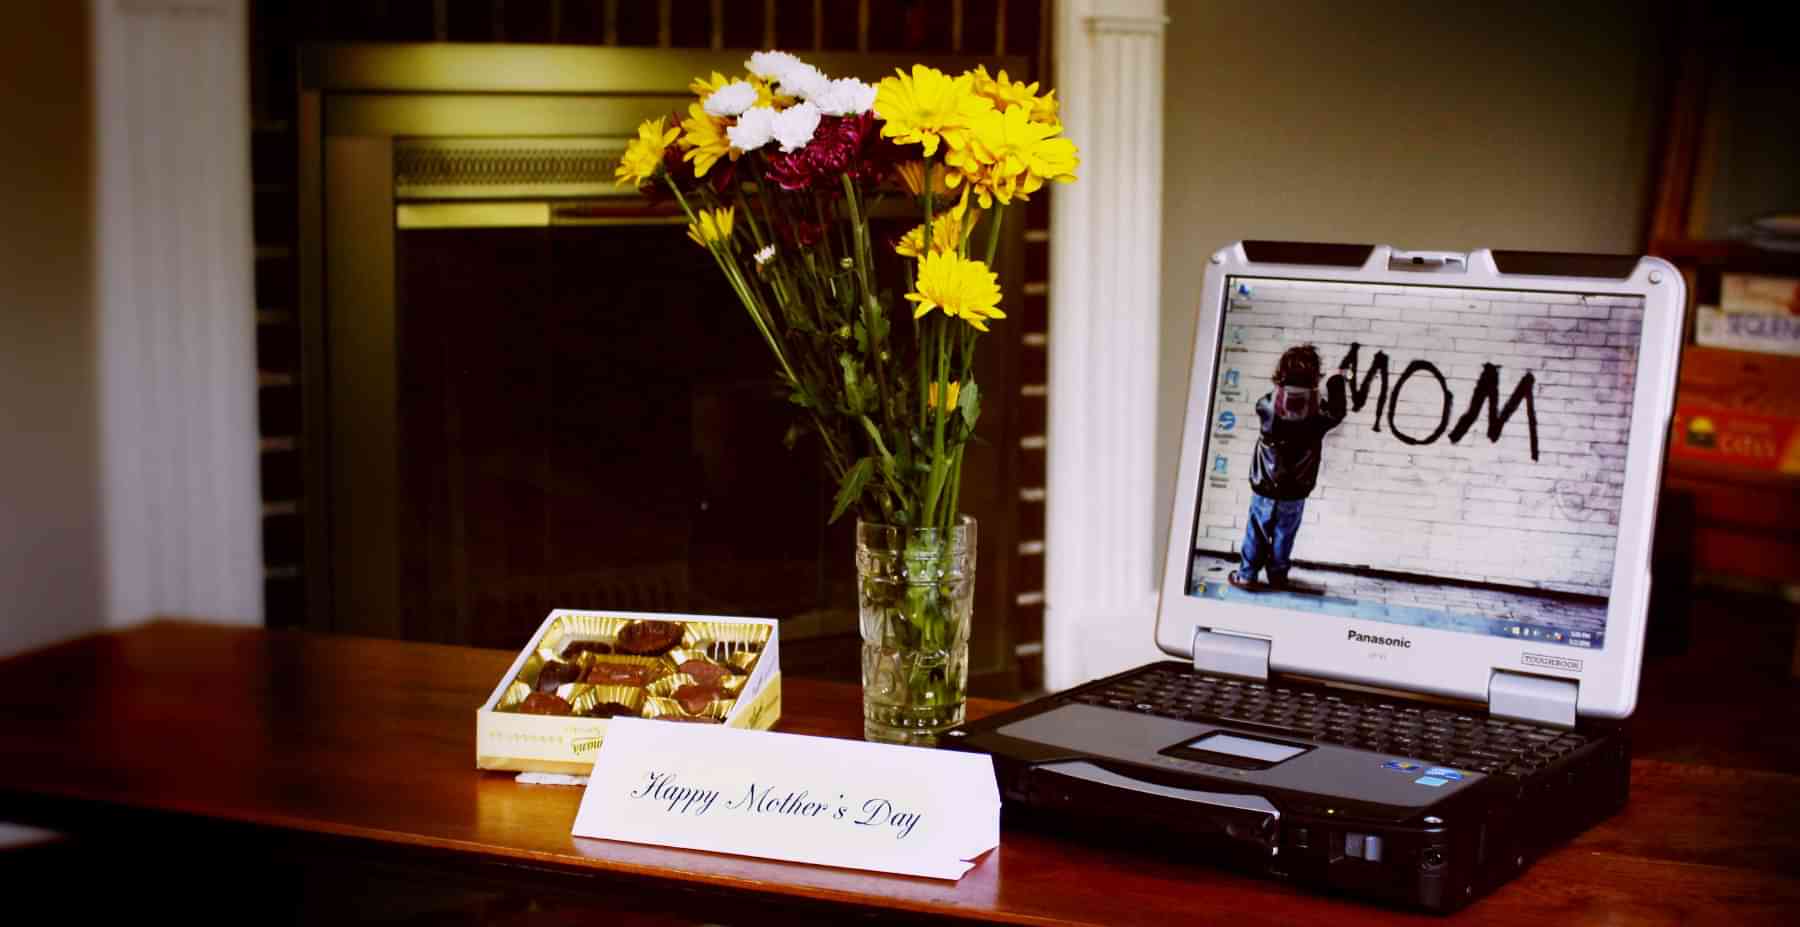 Laptop on table with flowers in a vase and a box of chocolates